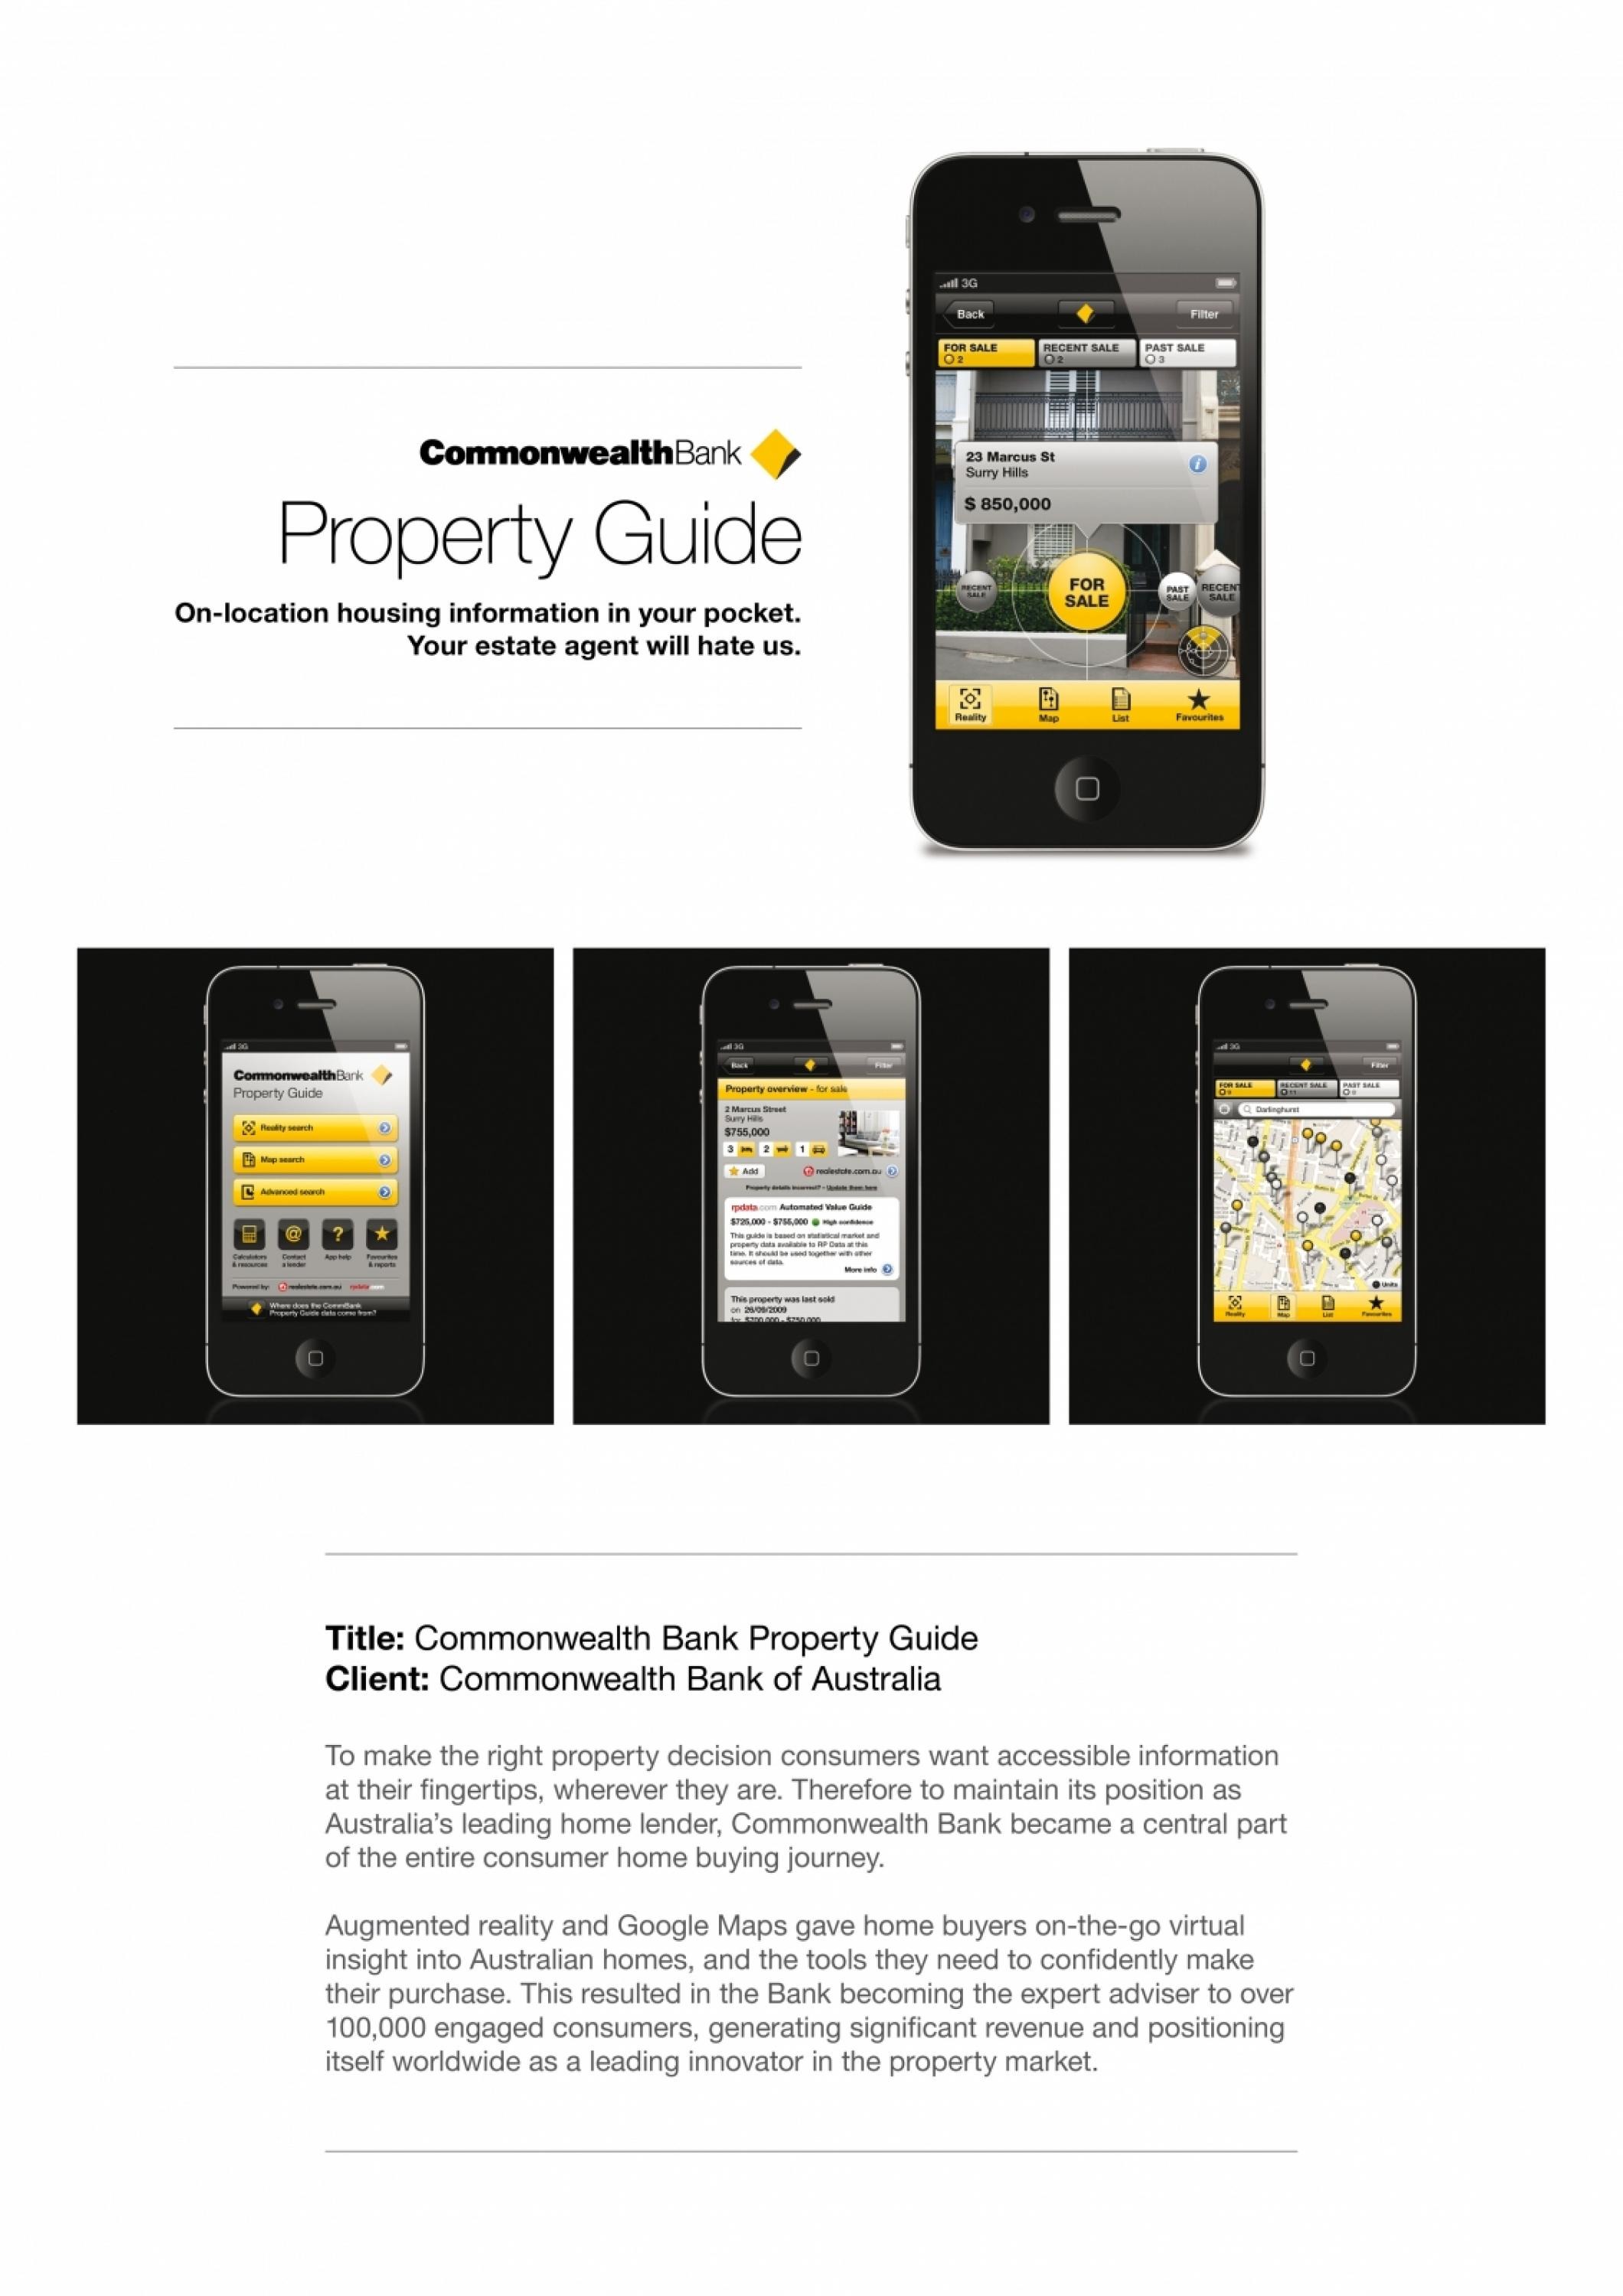 THE COMMBANK PROPERTY GUIDE APPLICATION